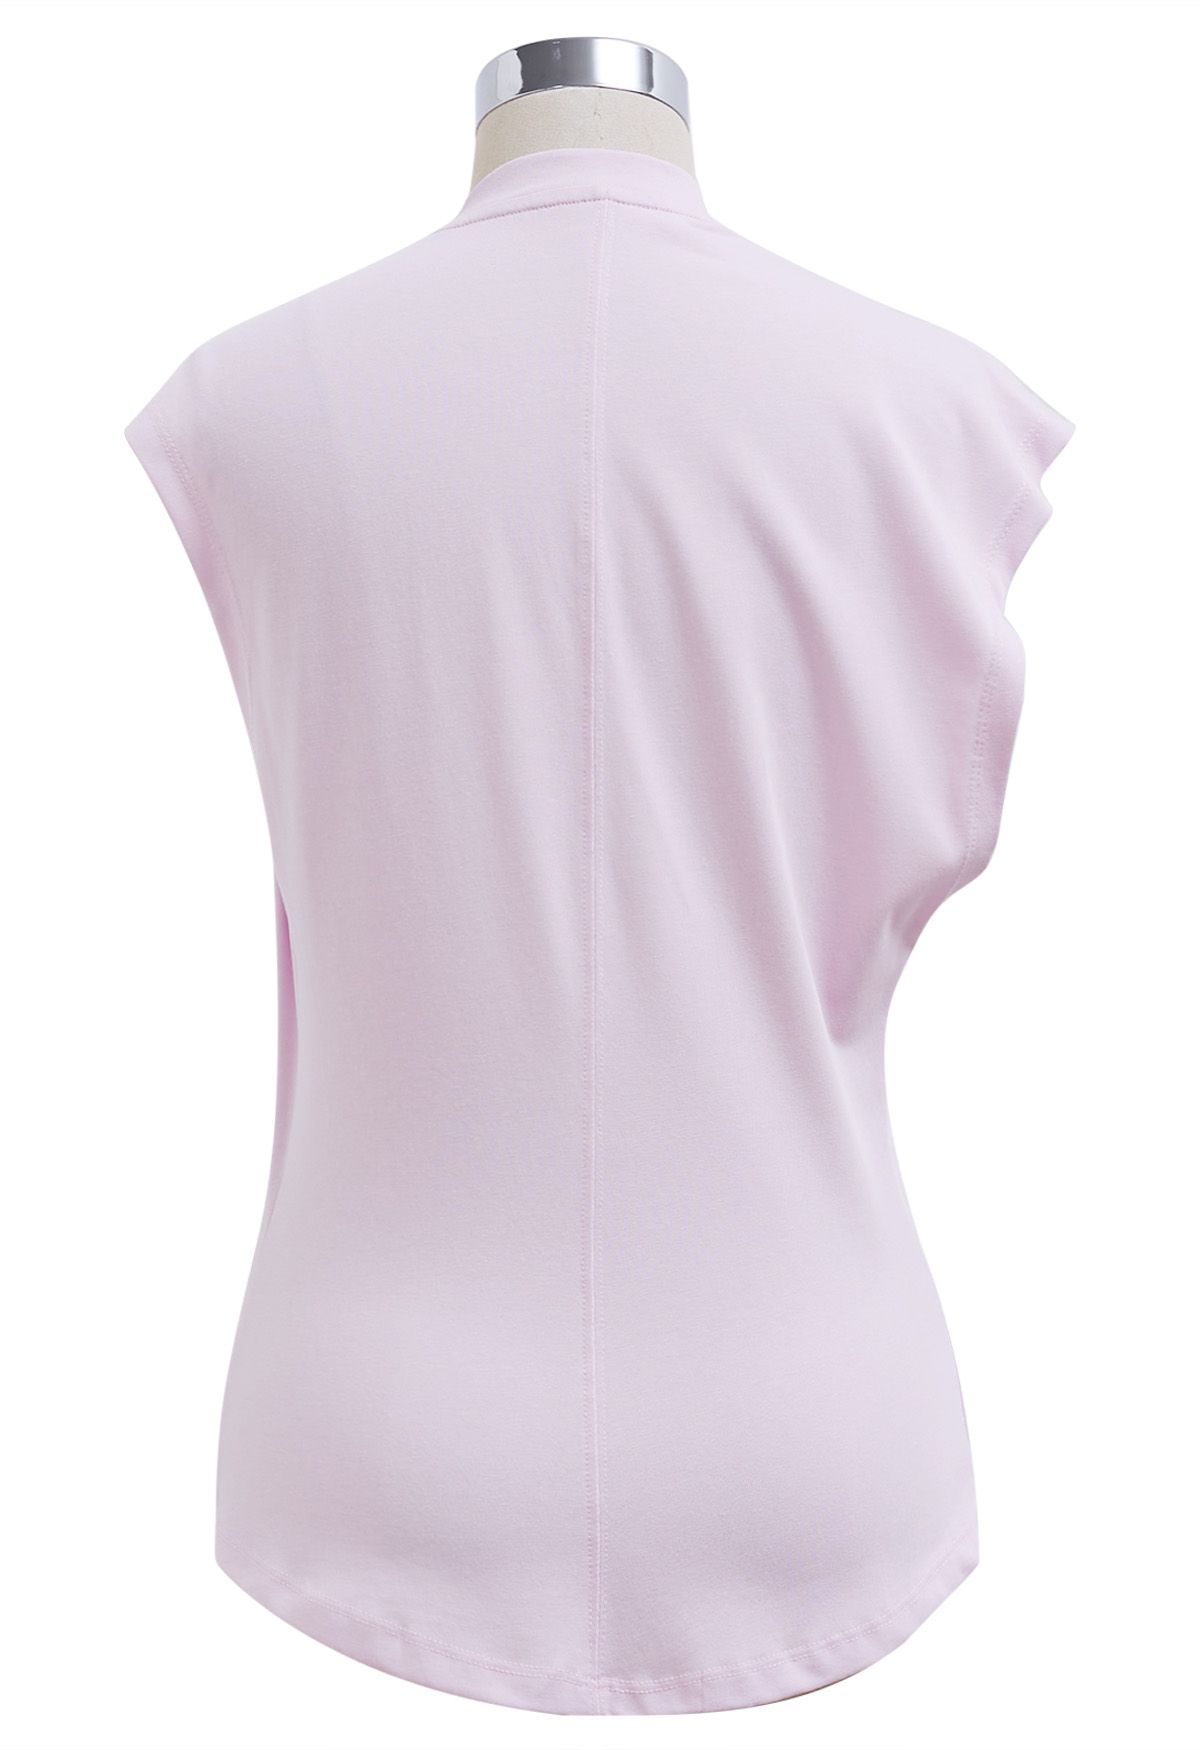 Sweetie Knot Sleeveless Top in Pink